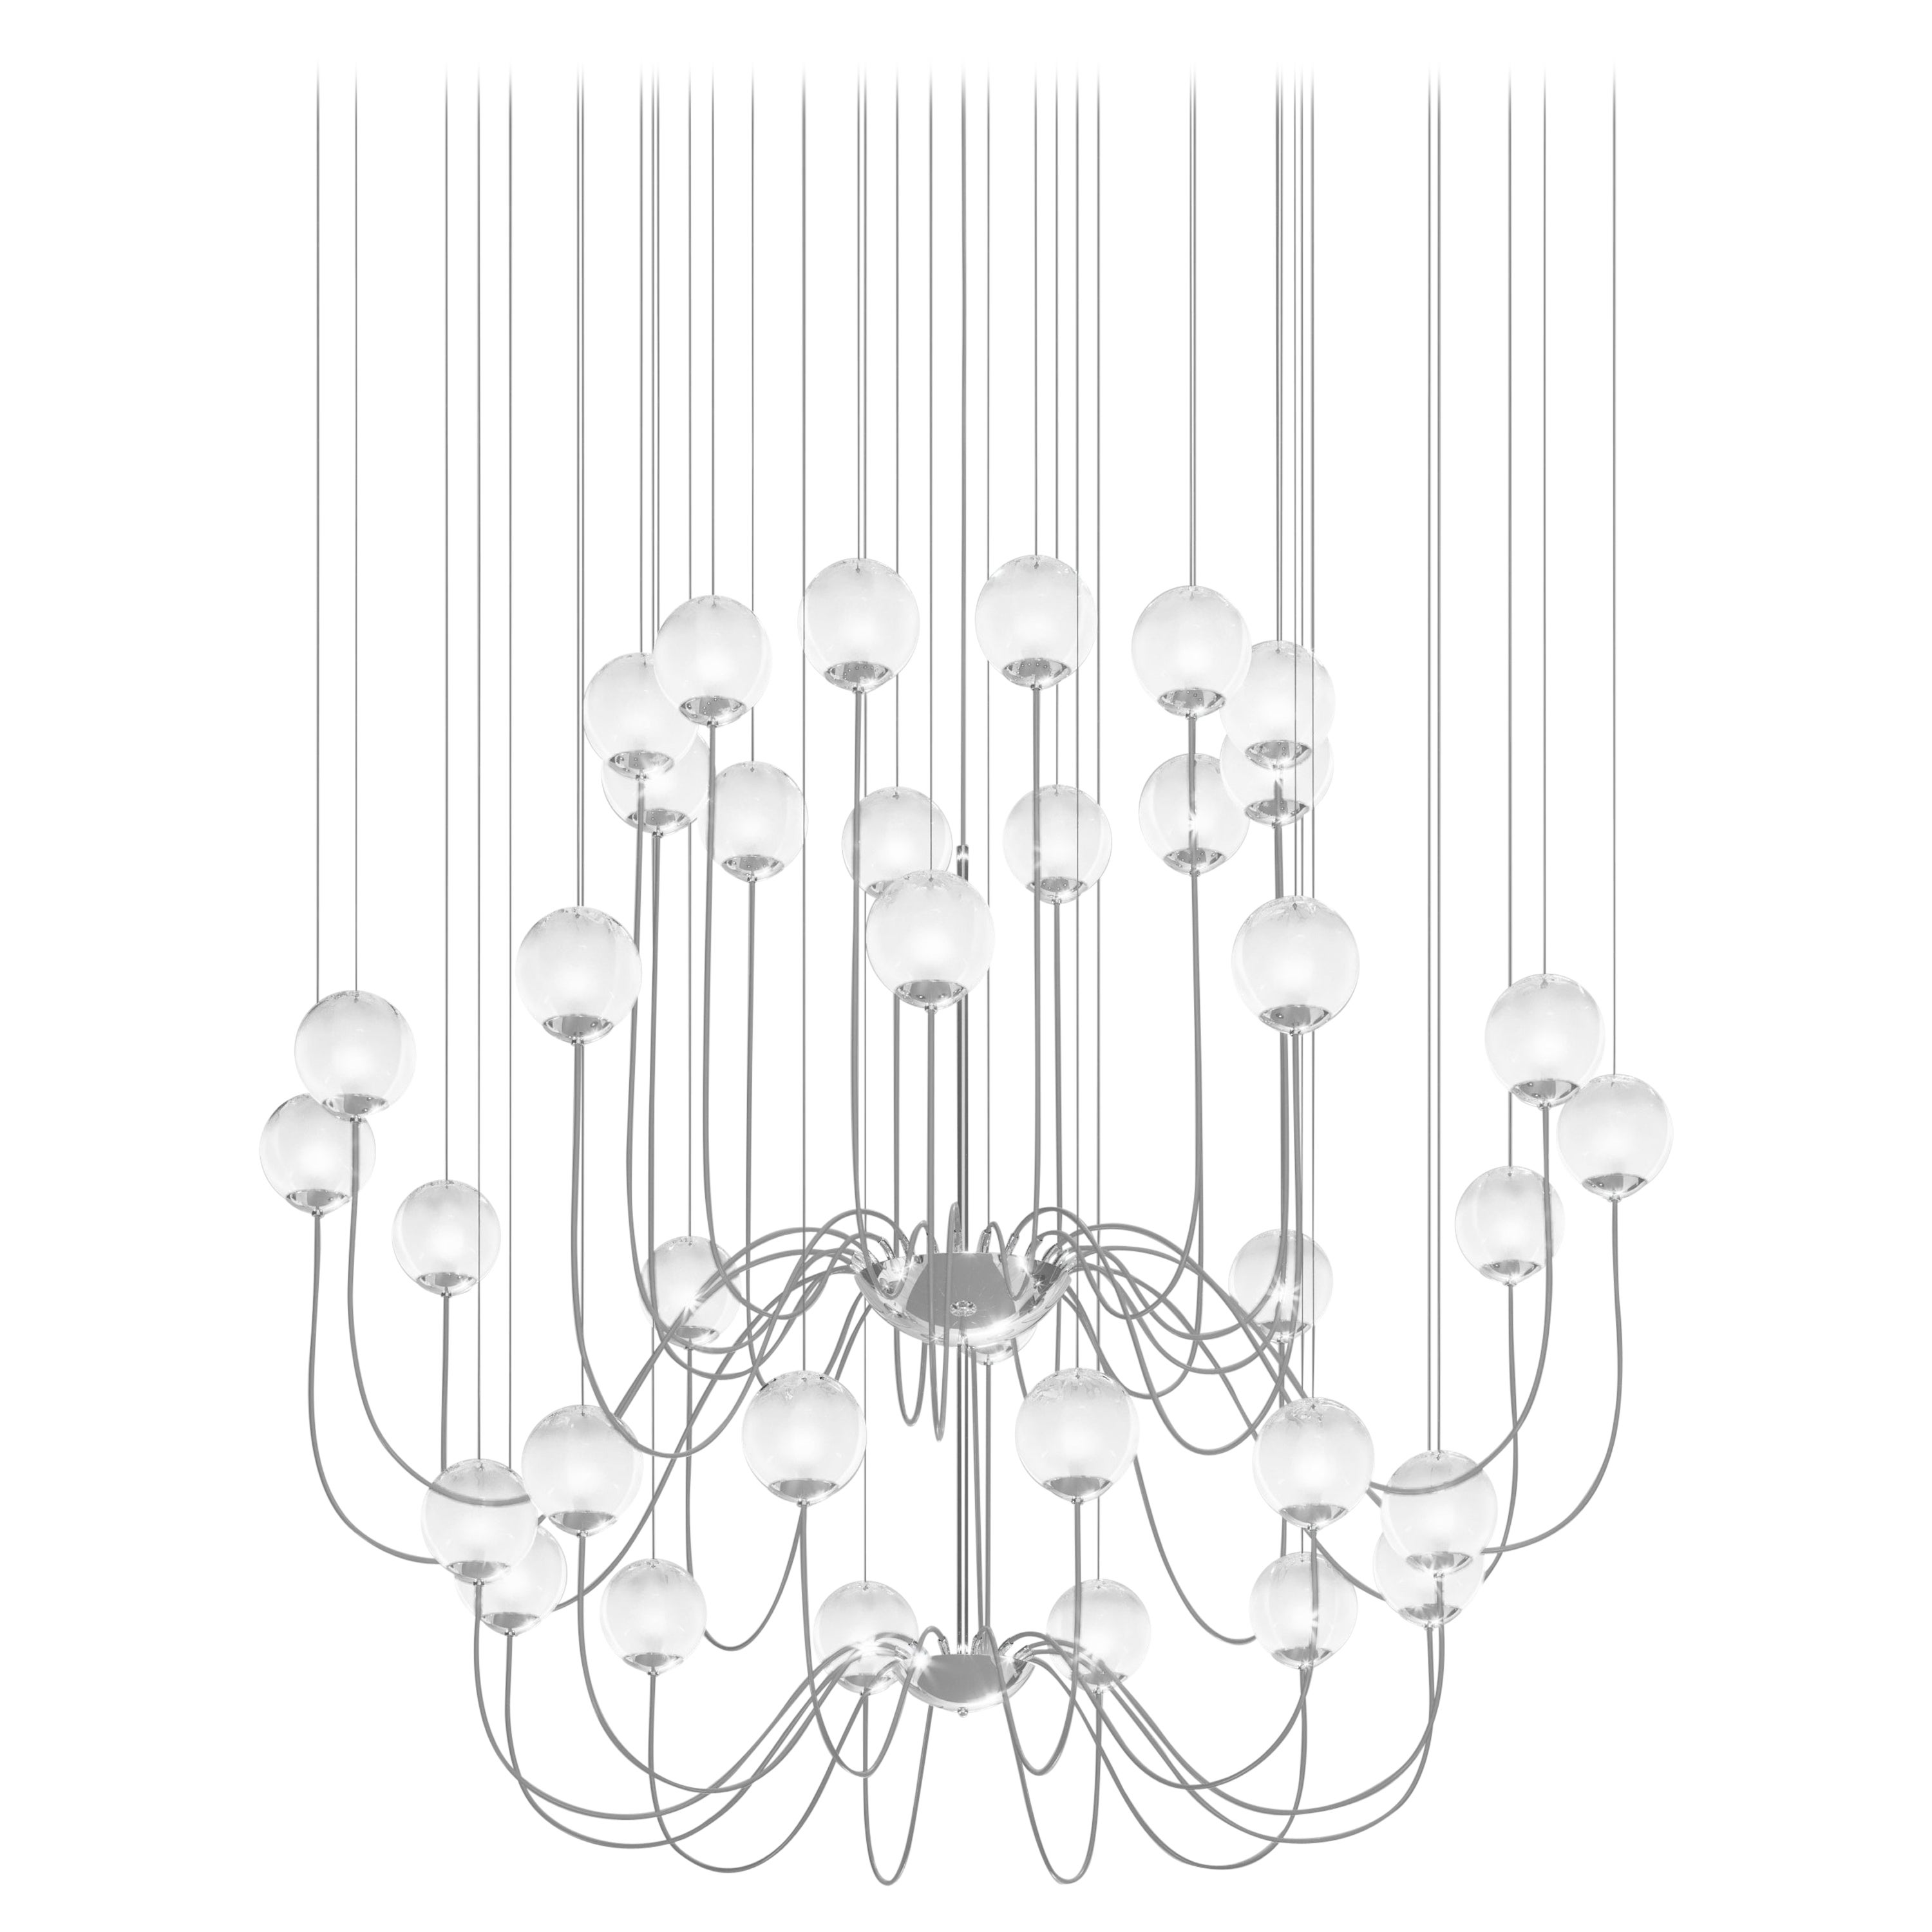 Vistosi Puppet Pendant Light in White Shaded Glass And Glossy Chrome Frame For Sale